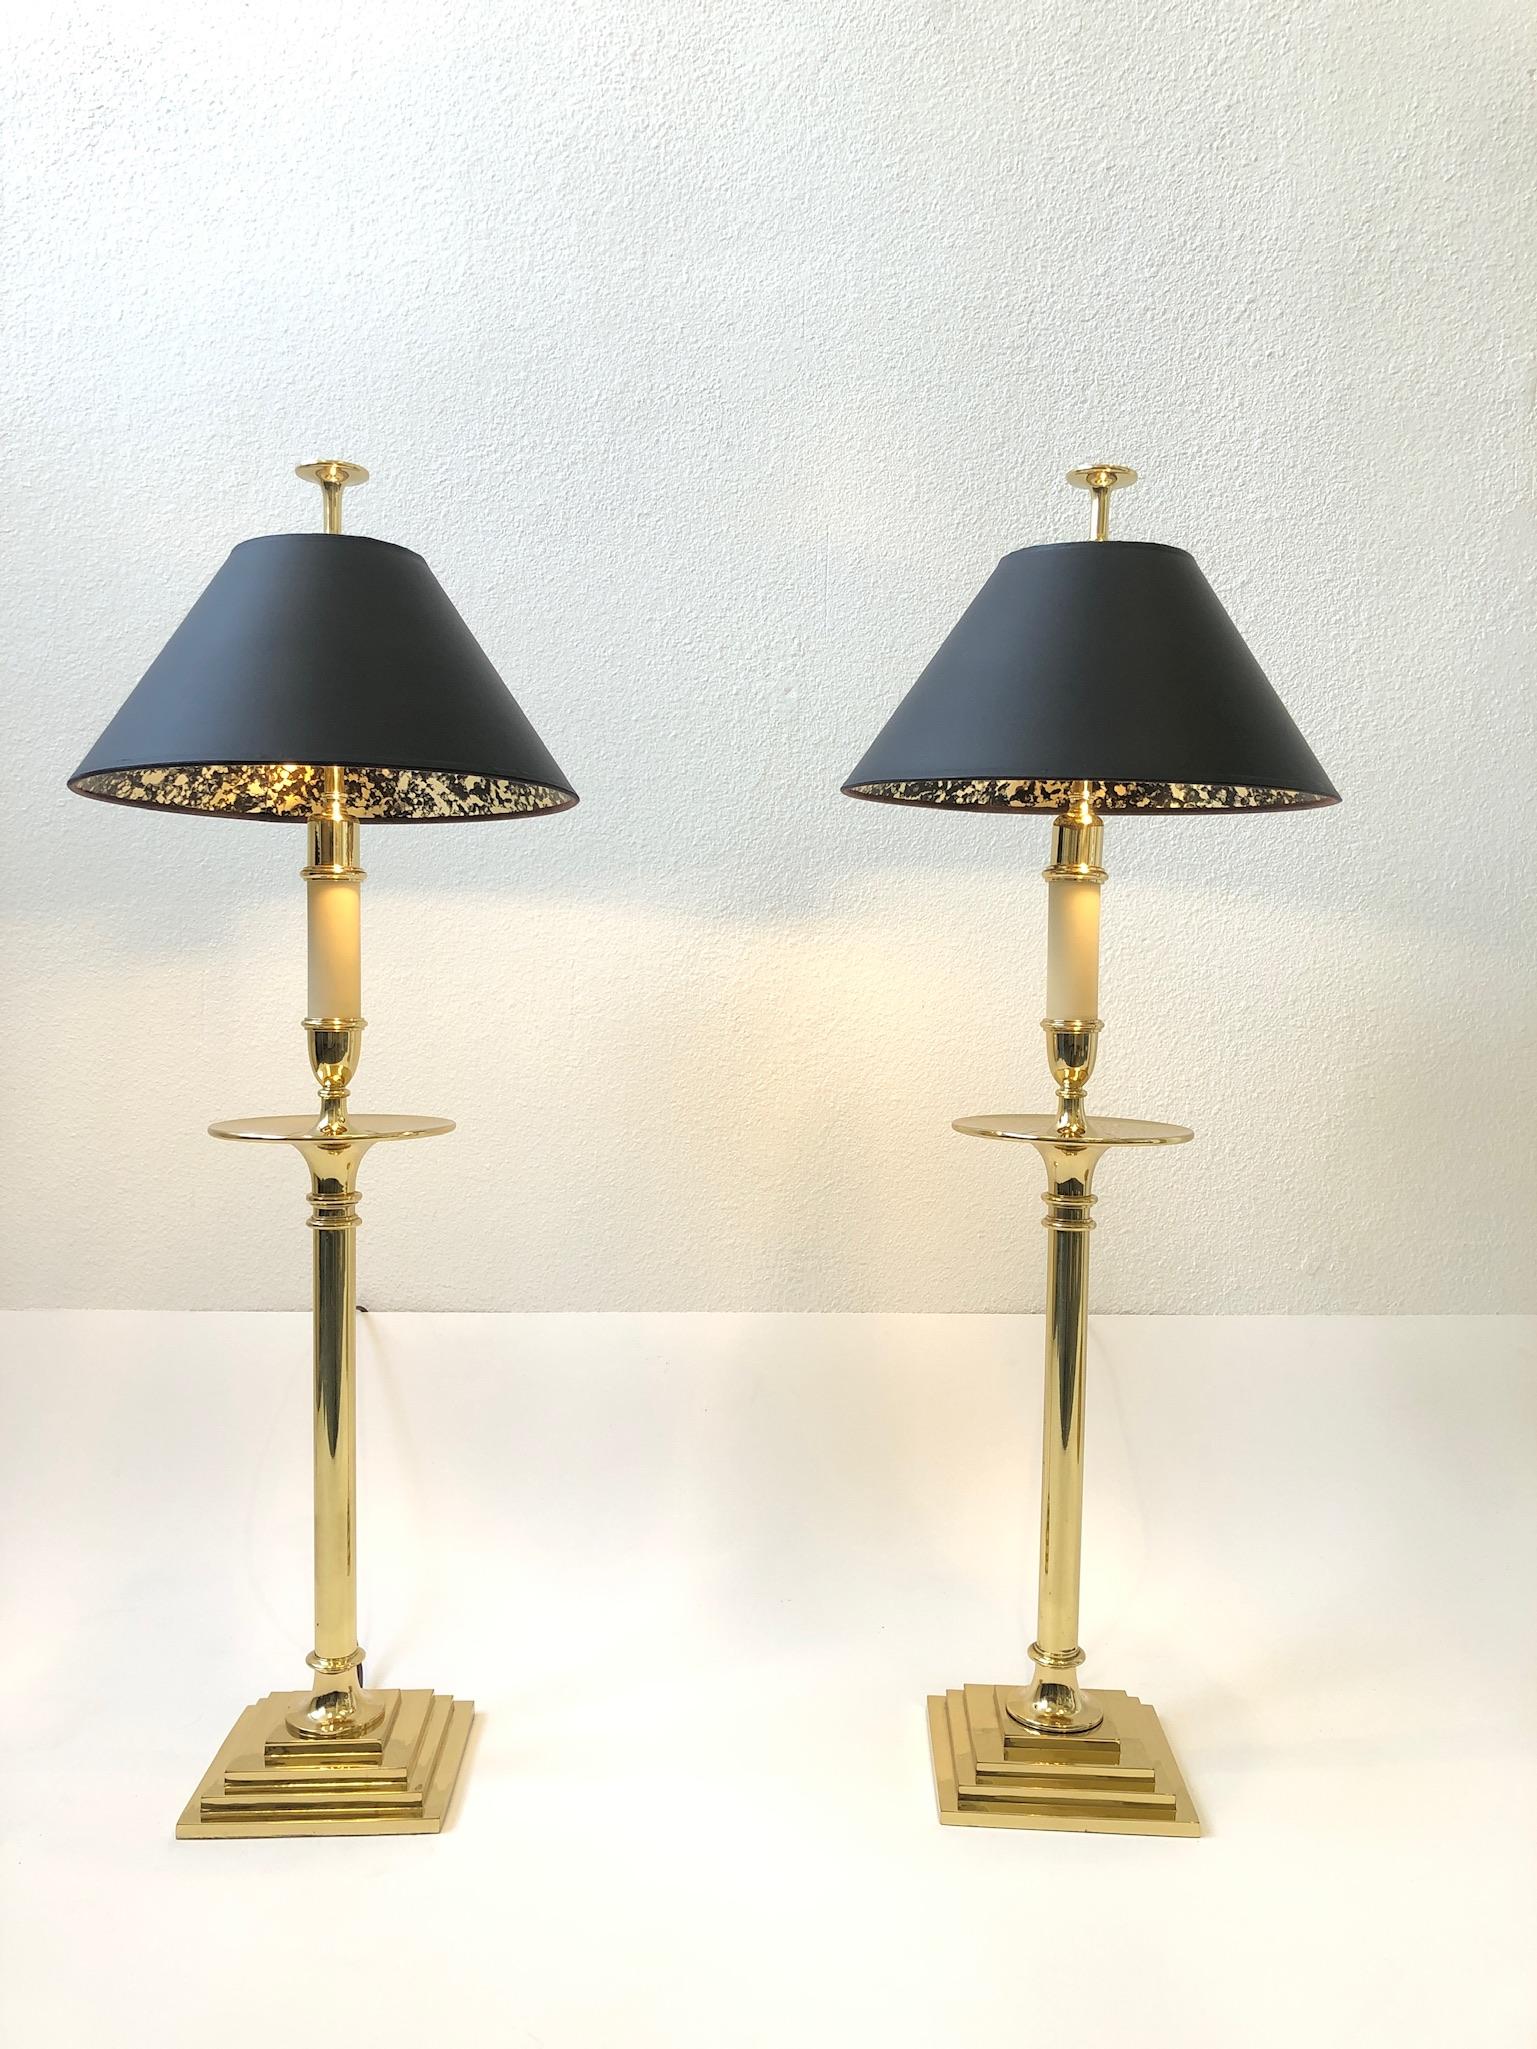 Glamorous 1970s pair of polish brass table lamps with black gold tortoise lining by Chapman.
Newly rewired, they take two regular Edison lightbulb.
Measurements: 13” diameter with shades 35.5” high to top of finial.
Base is 6.5” by 6.5”.